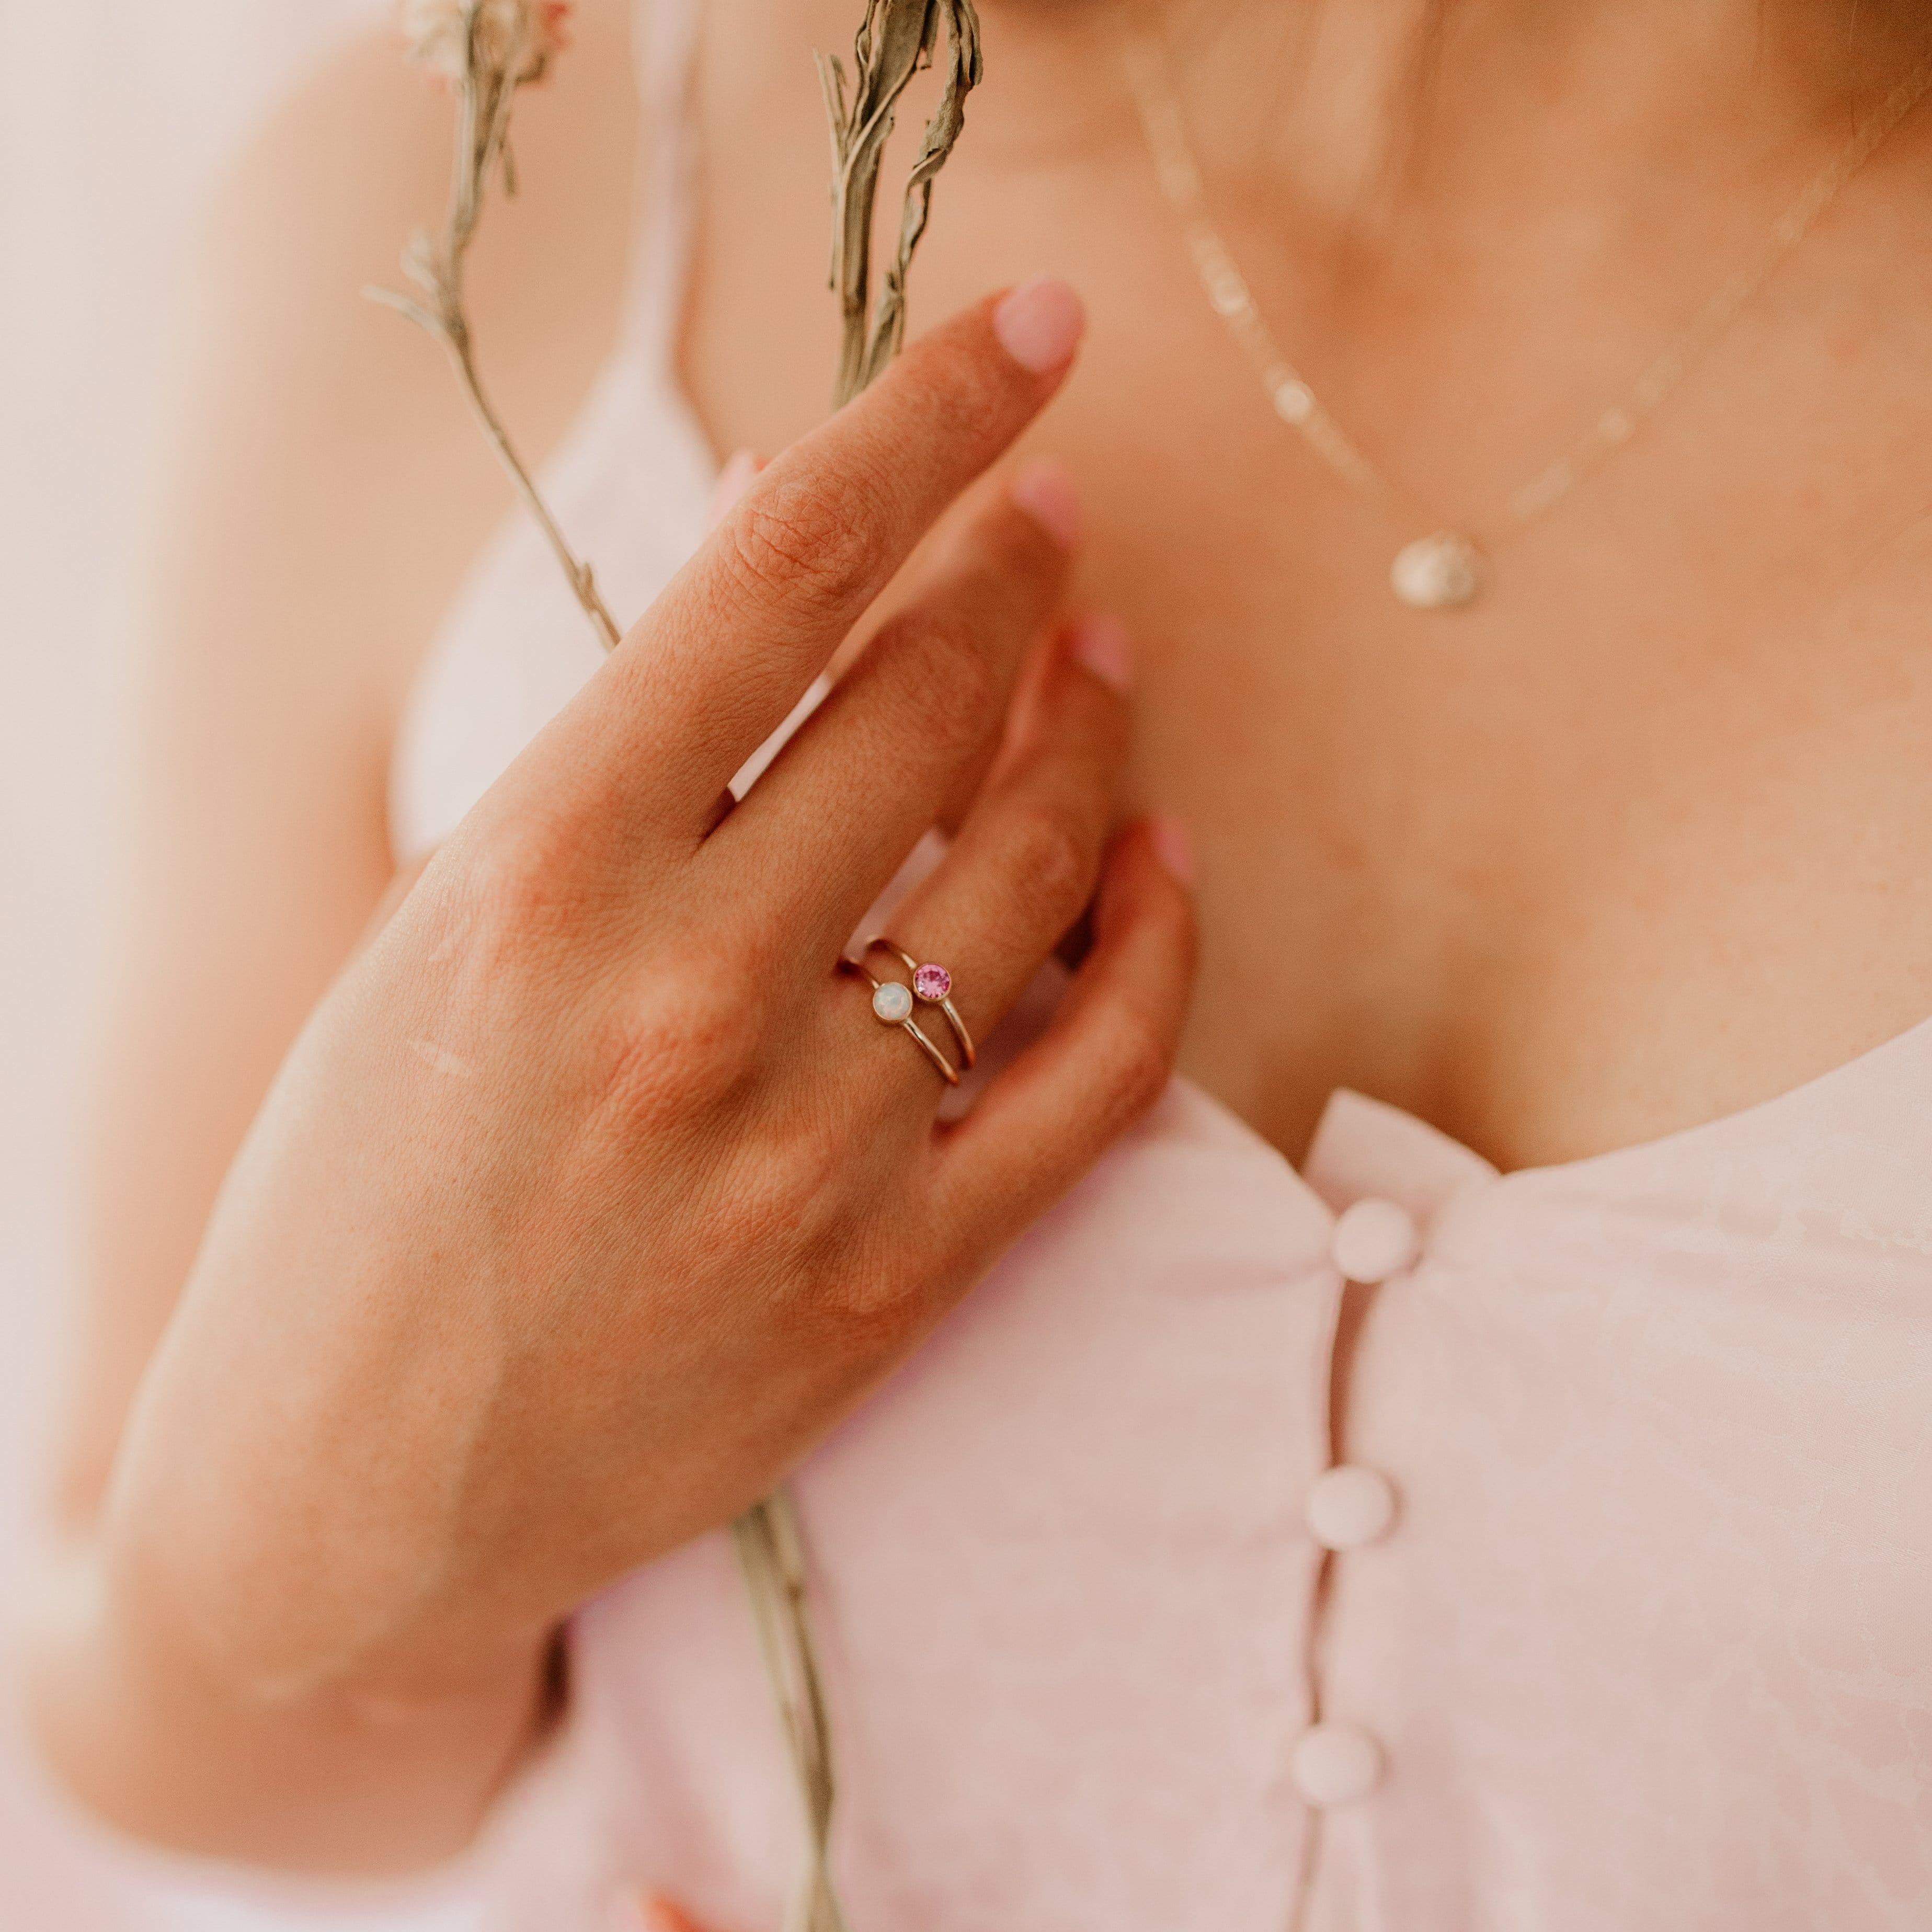 October Birthstone Ring ∙ Pink Tourmaline - Nolia Jewelry - Meaningful + Sustainably Handcrafted Jewelry